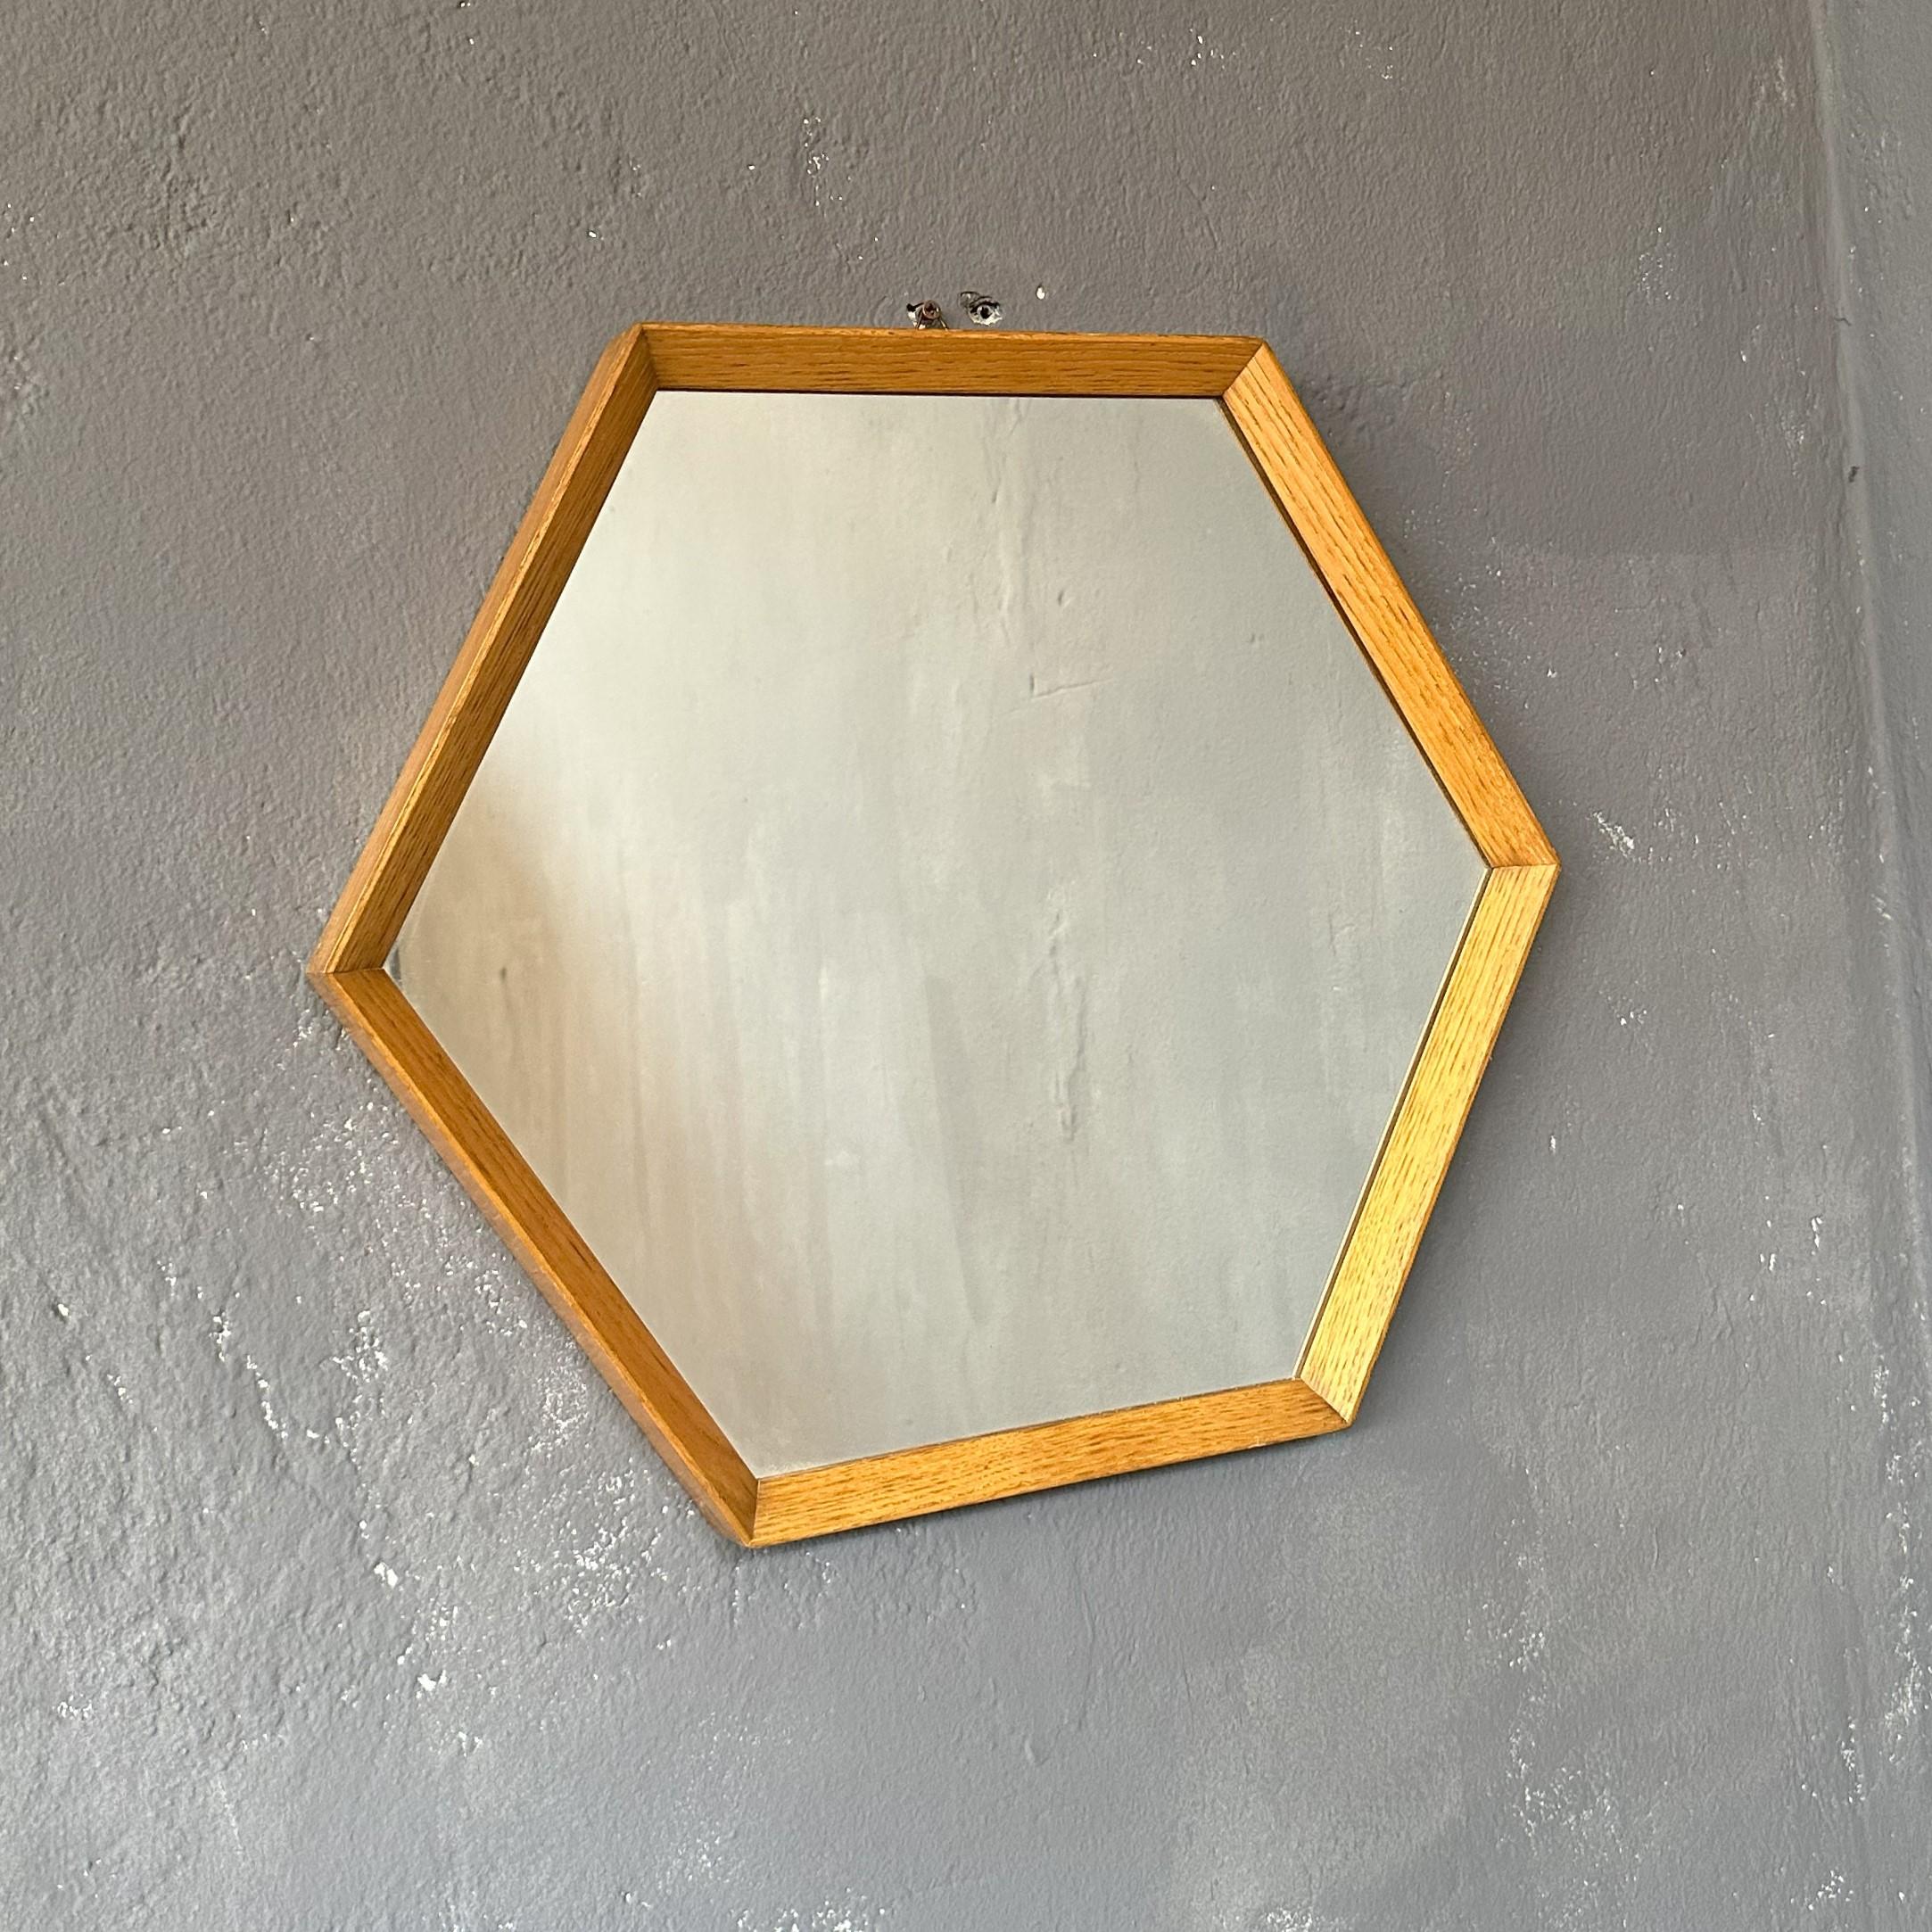 Mid-Century Modern hexagonal Mirror with oak wood frame 1960 Italian manufacture In Good Condition For Sale In Milan, IT